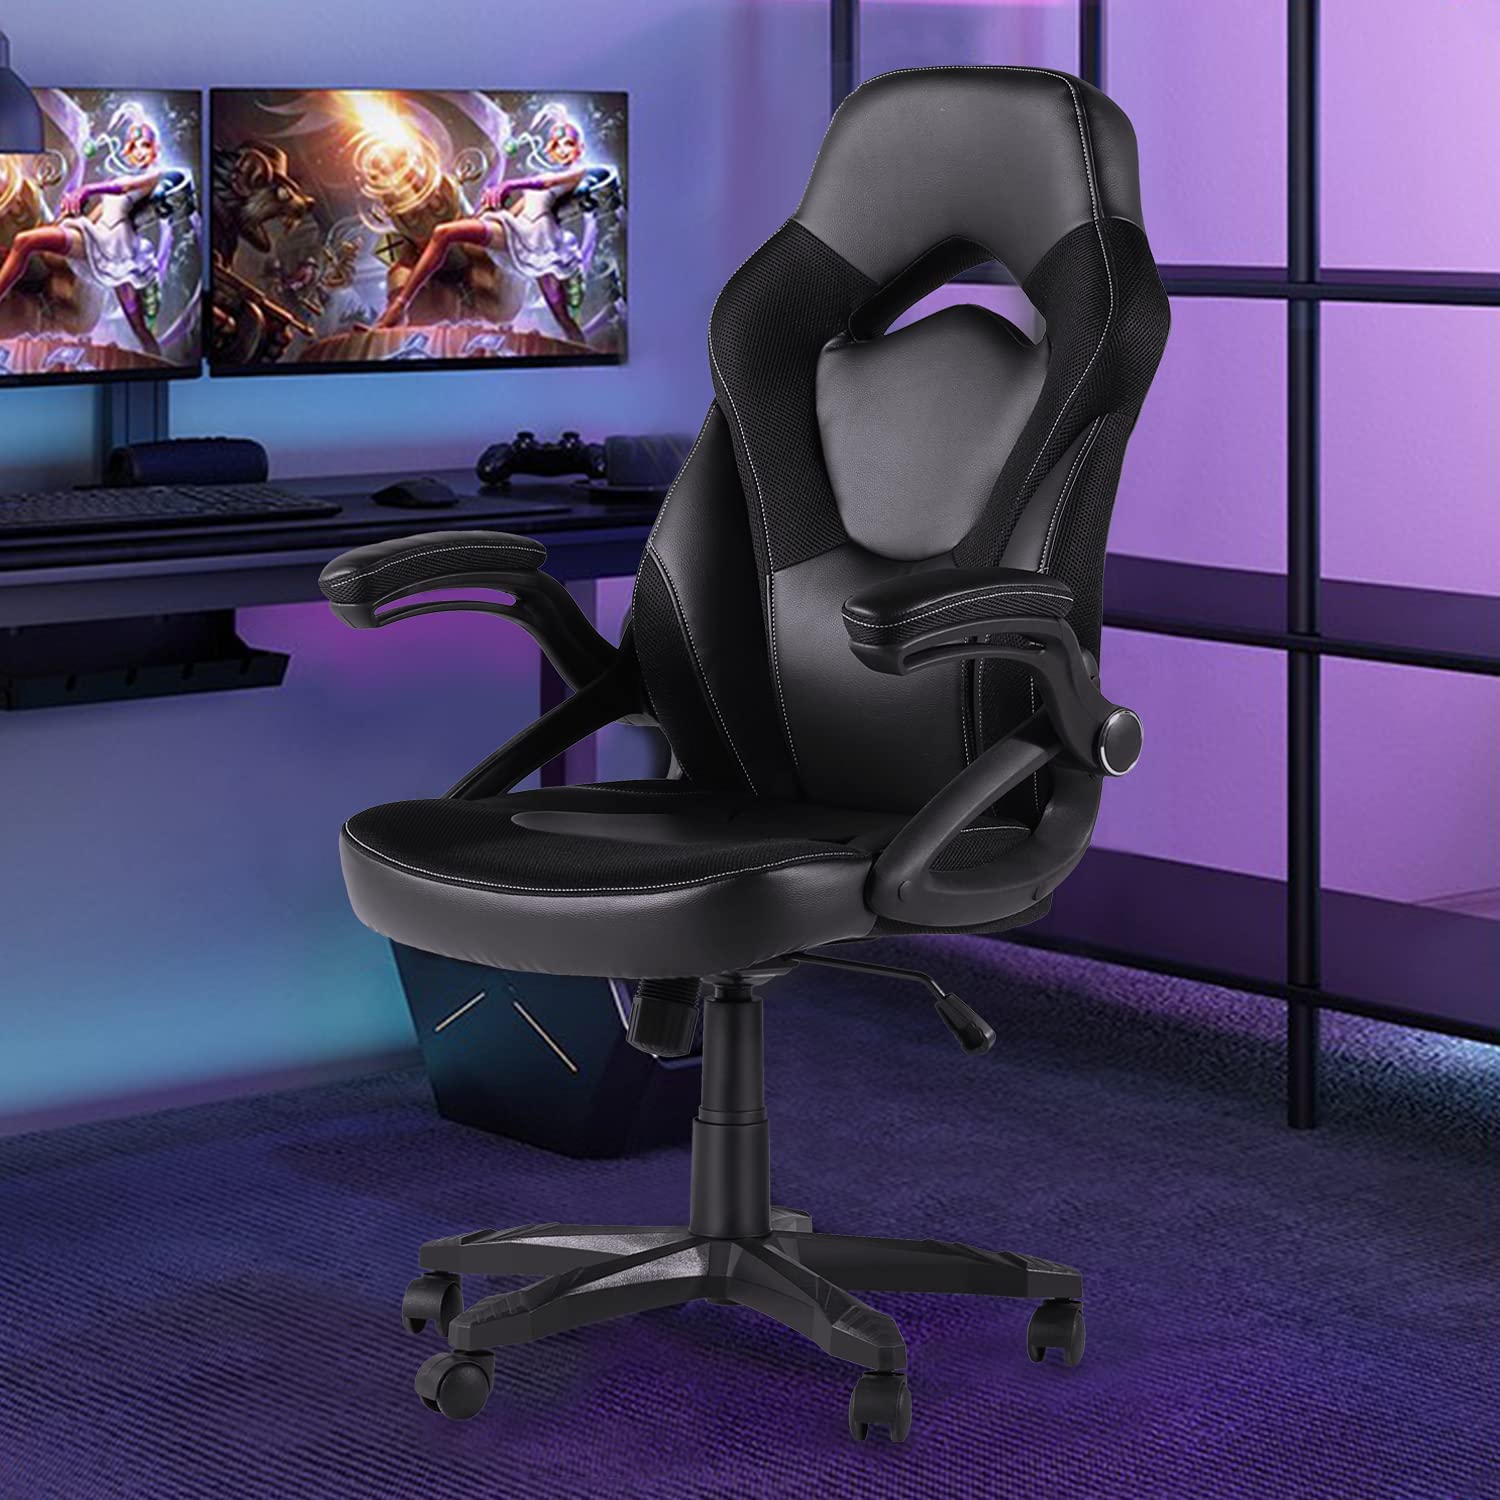 Gaming Racing Ergonomic High-Back Computer Chair, Adjustable Seat Height, Flip Up Arms